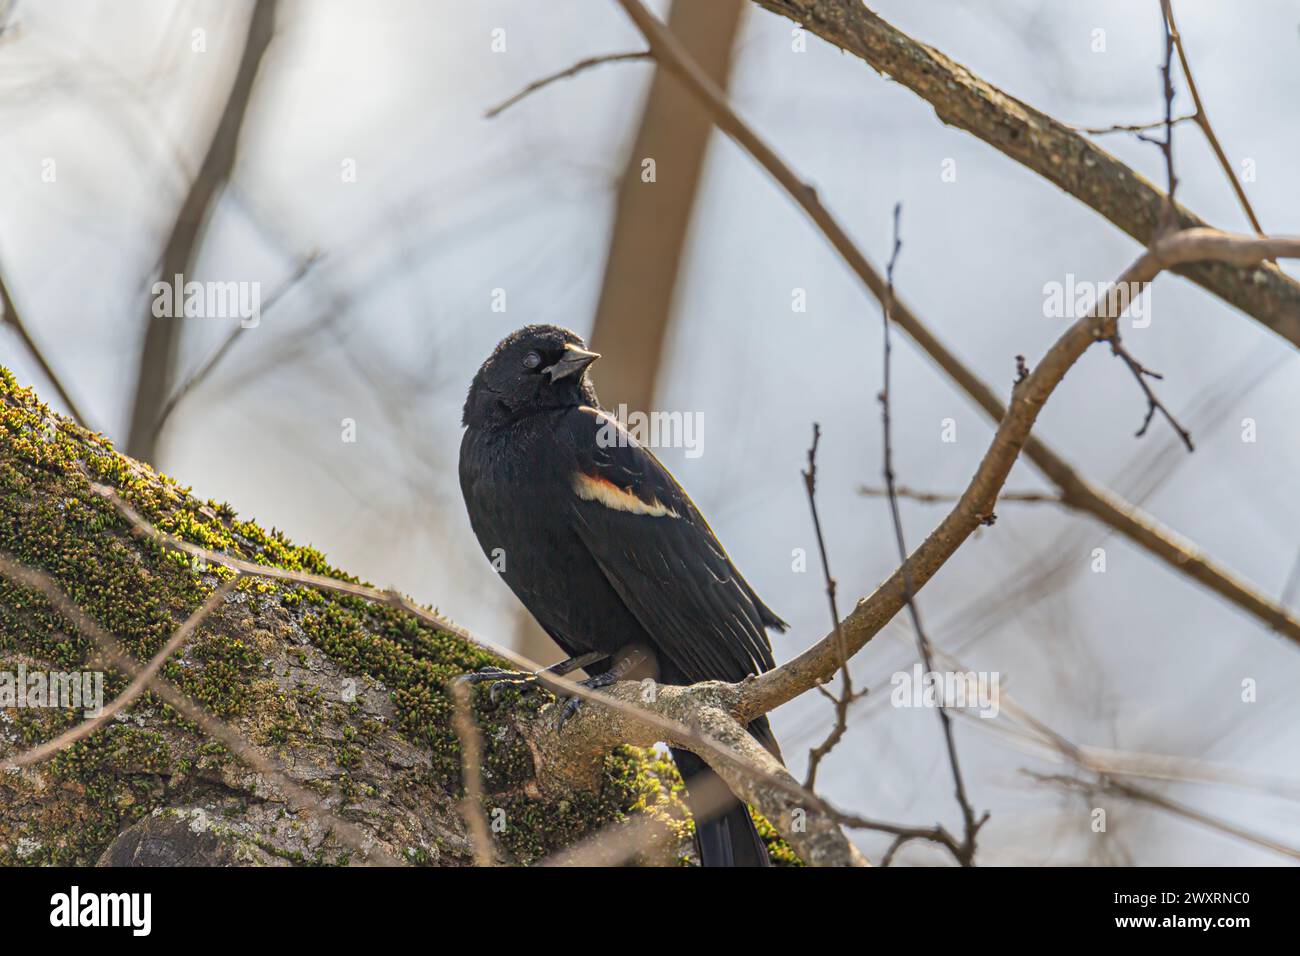 A blackbird perched on a mossy branch in the tree. Stock Photo